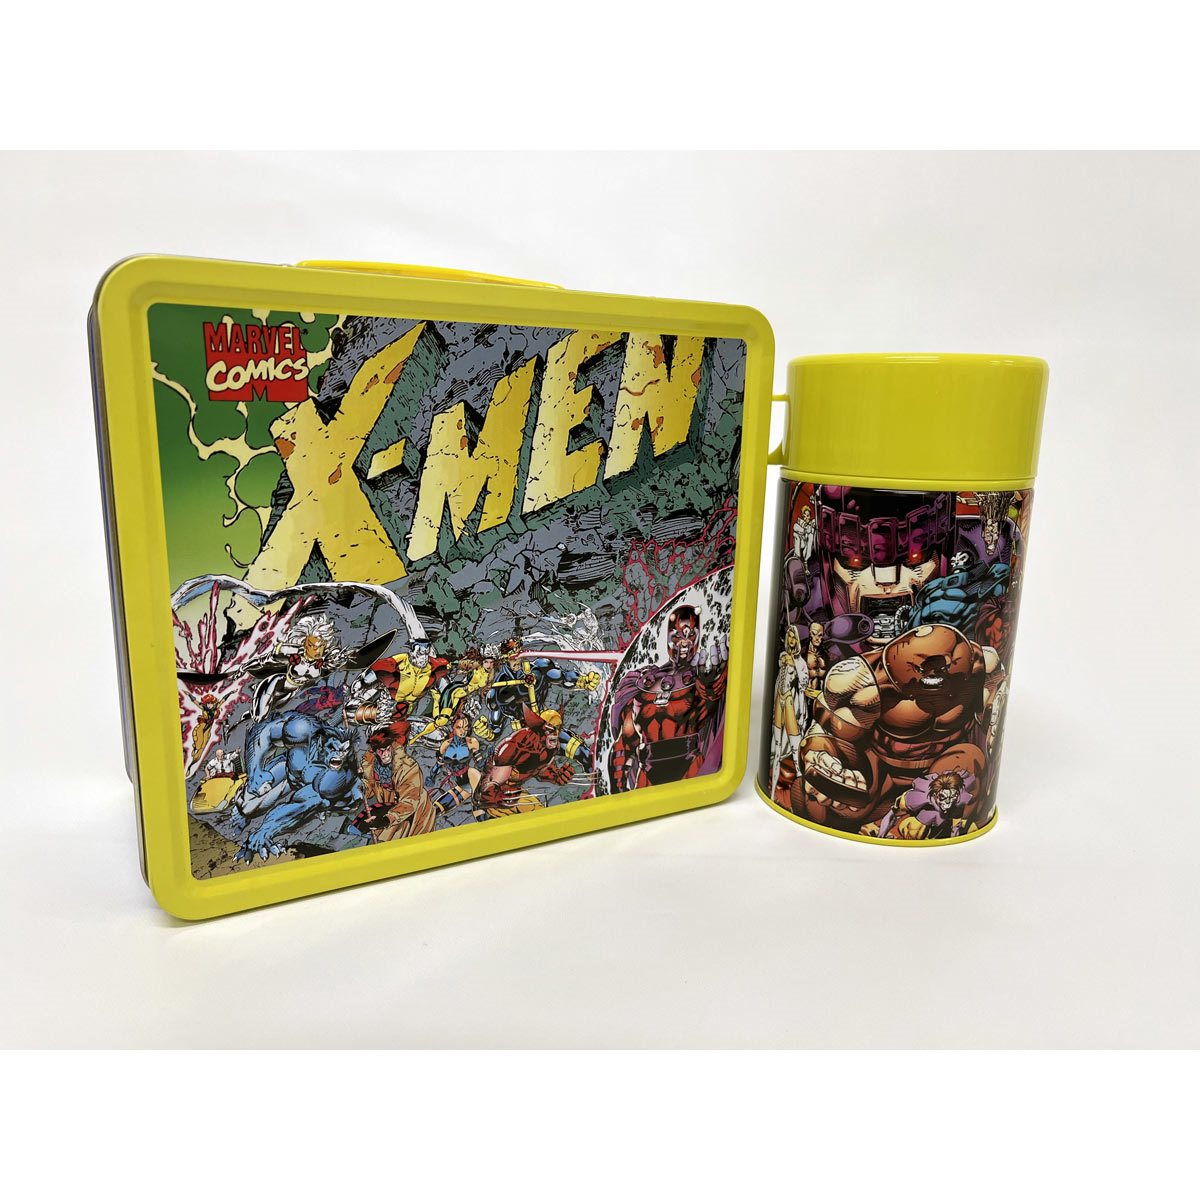 Marvel Spider-Man Tin Titans Lunch Box with Thermos - Previews Excluisve